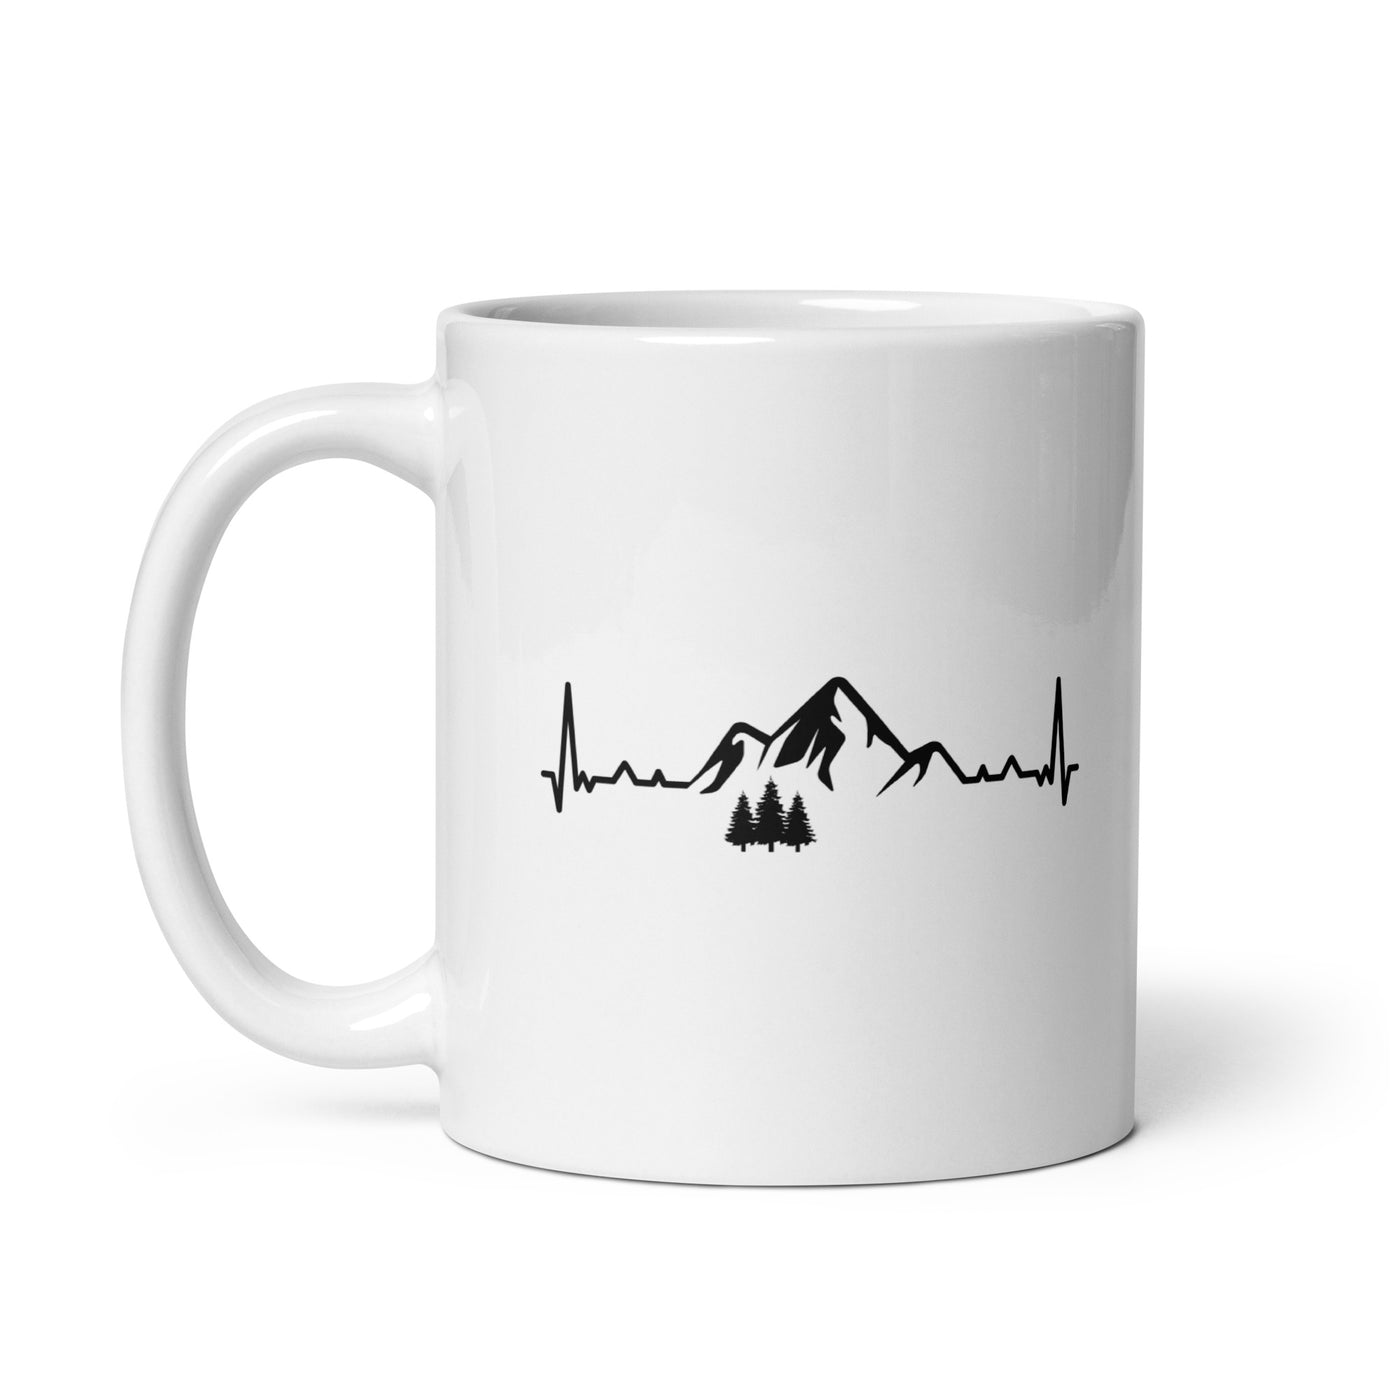 Heartbeat Mountain 1 And Trees - Tasse camping 11oz